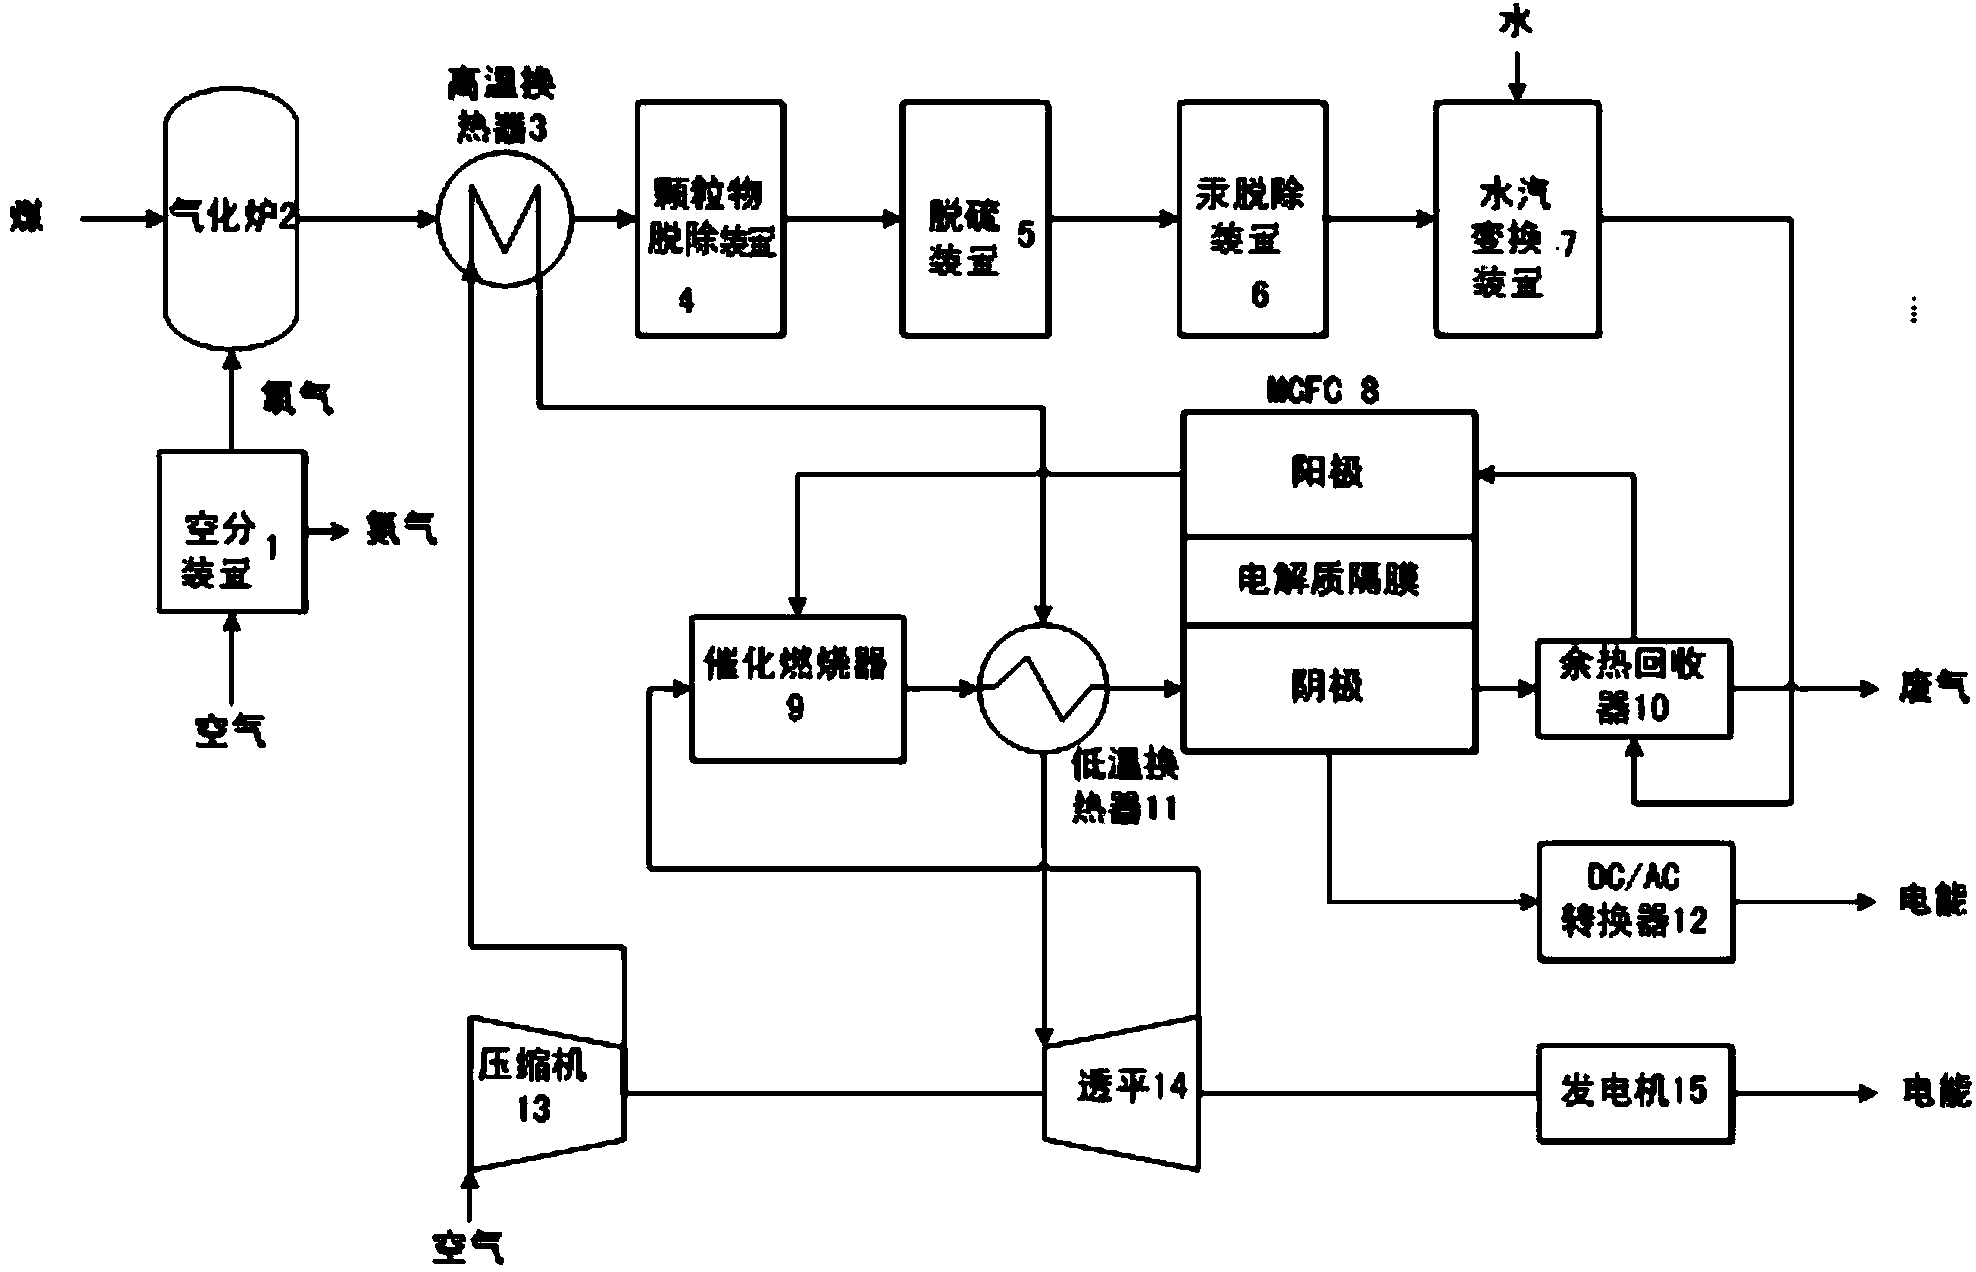 Integrated gasification molten carbonate fuel cell power generating system